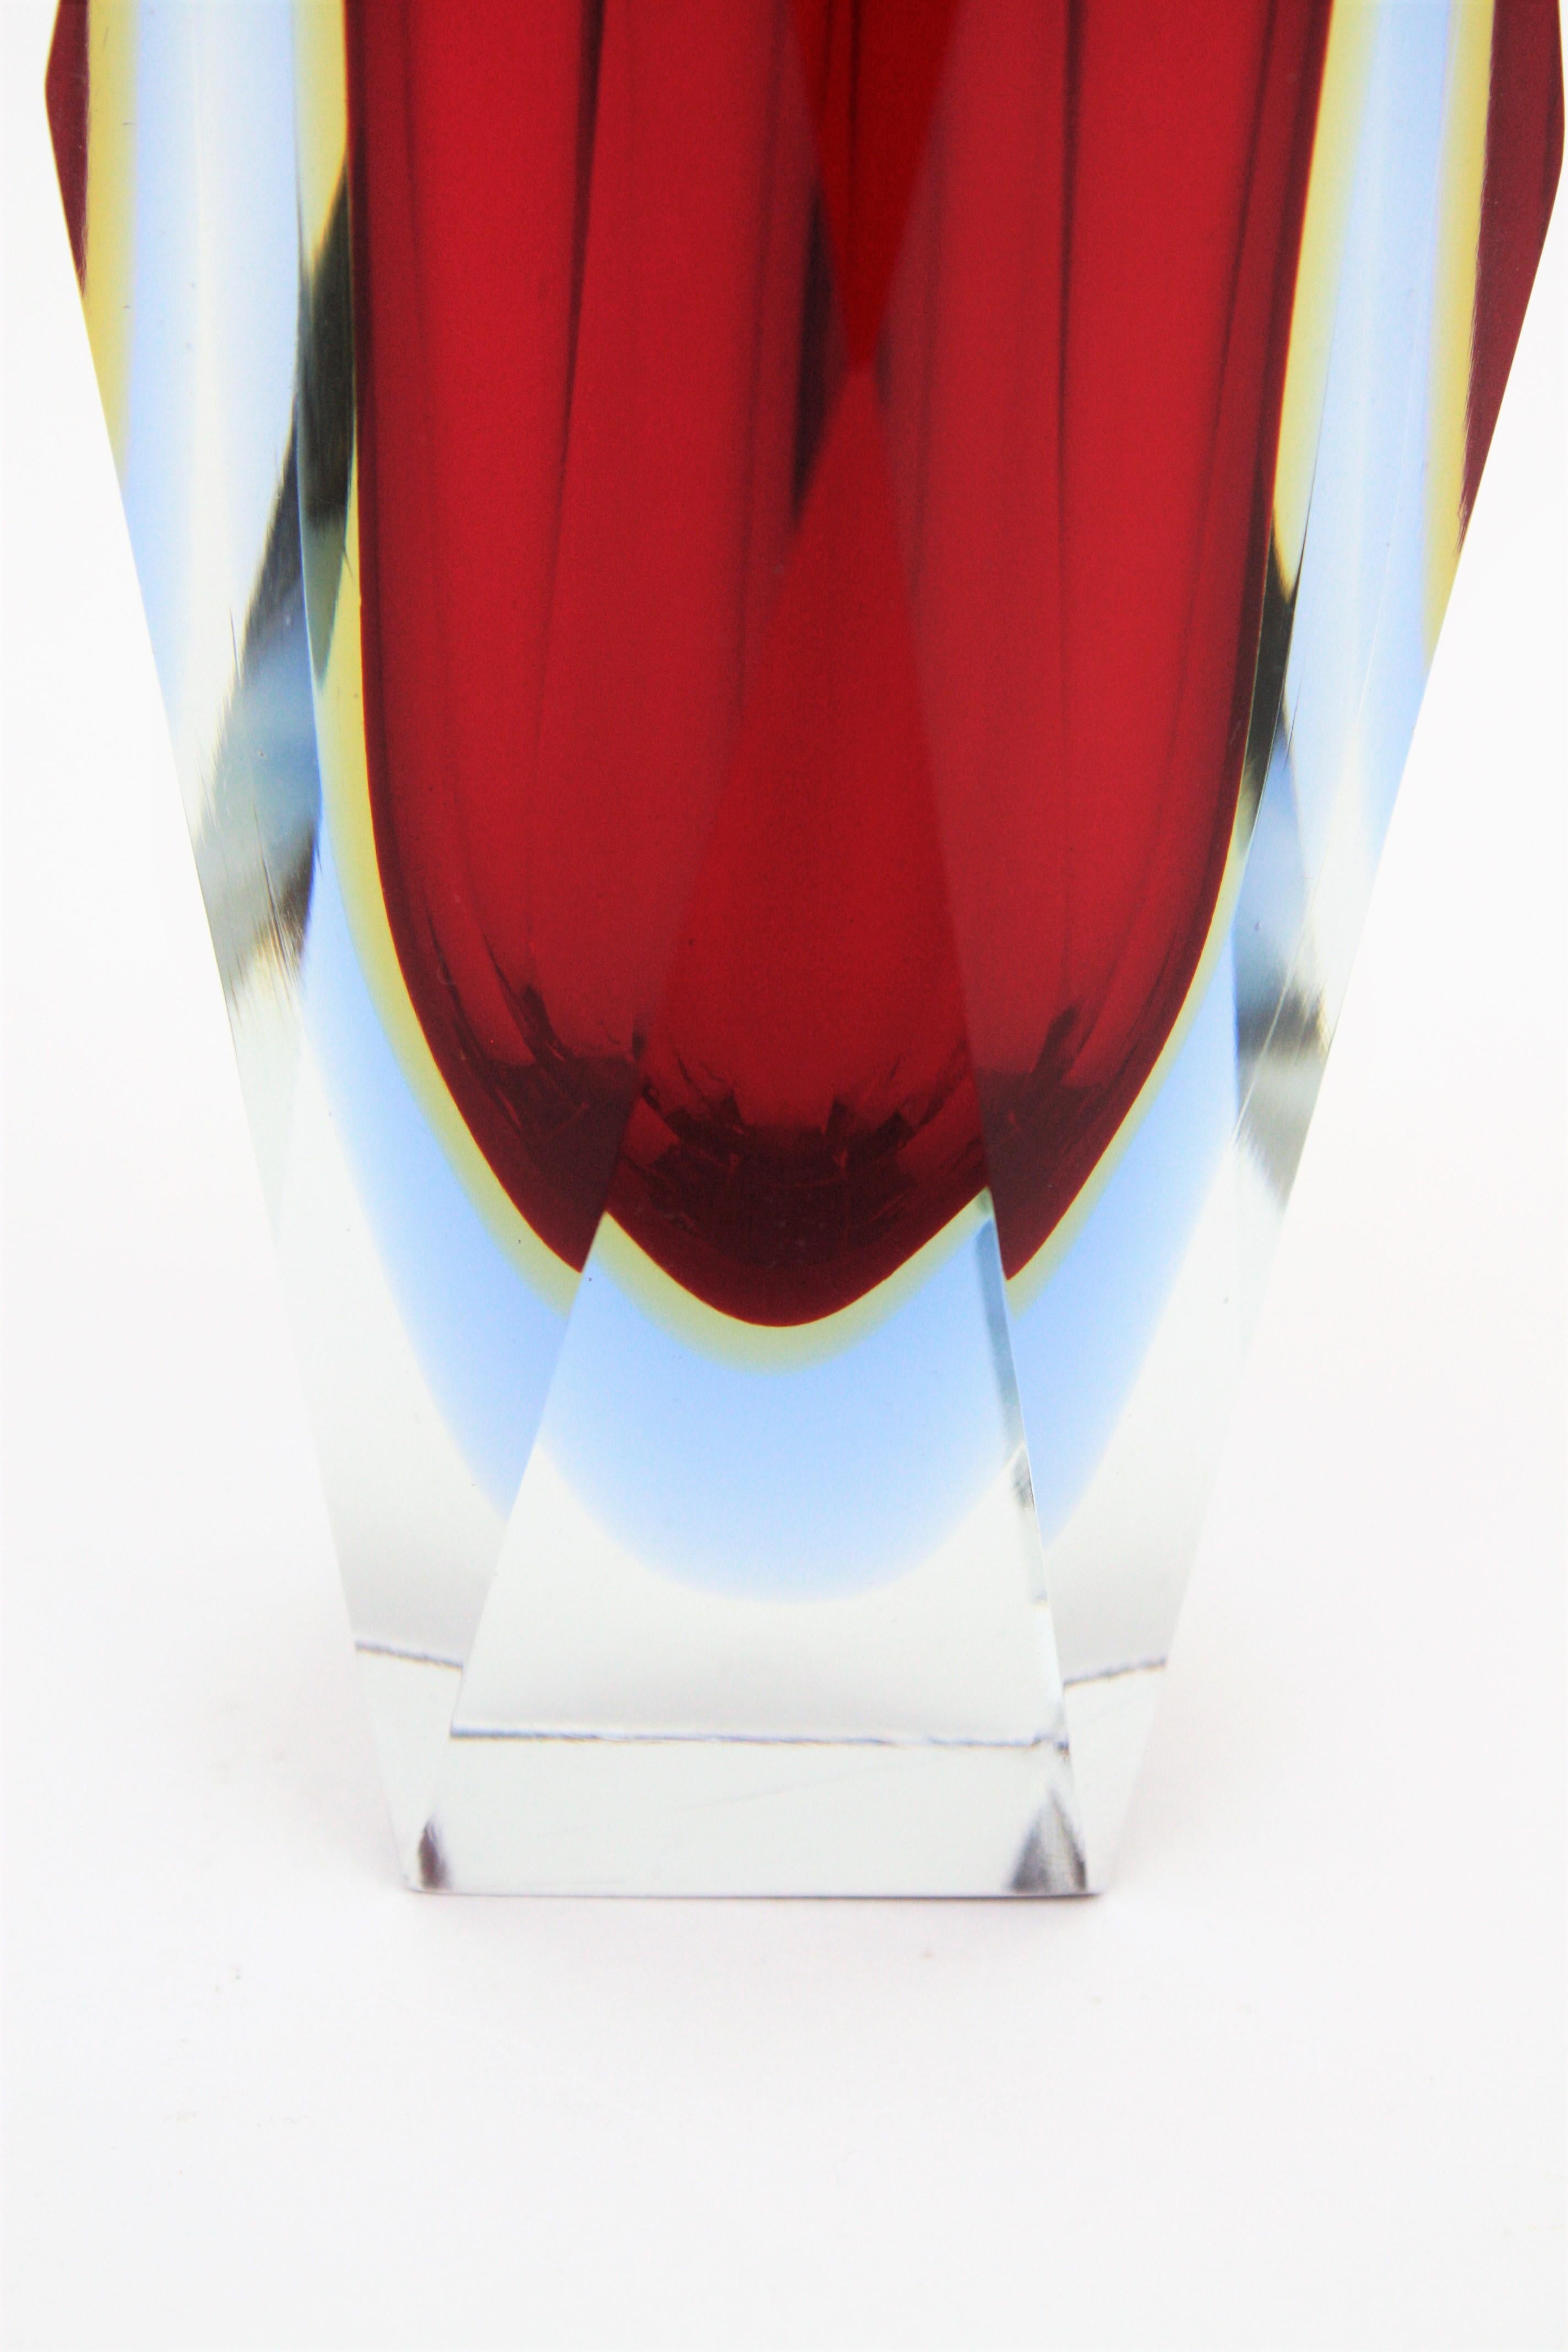 Mandruzzato Murano Sommerso Red, Blue, Yellow & Clear Faceted Glass Vase, 1960s For Sale 7